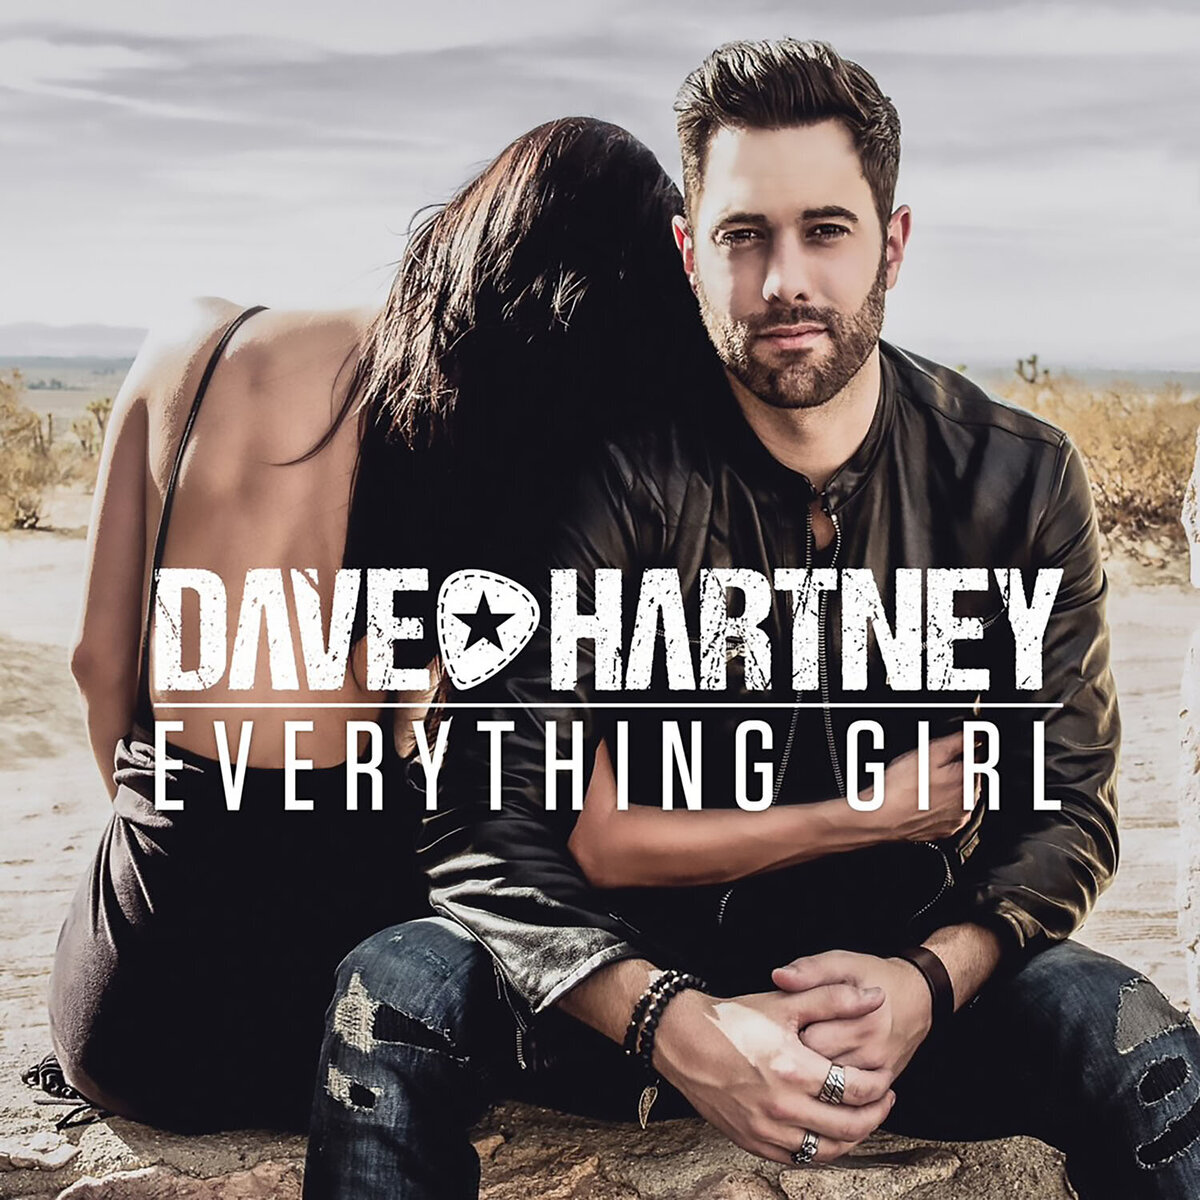 Country singer Dave Hartney single cover Everything Girl sitting with girl resting head on his shoulder